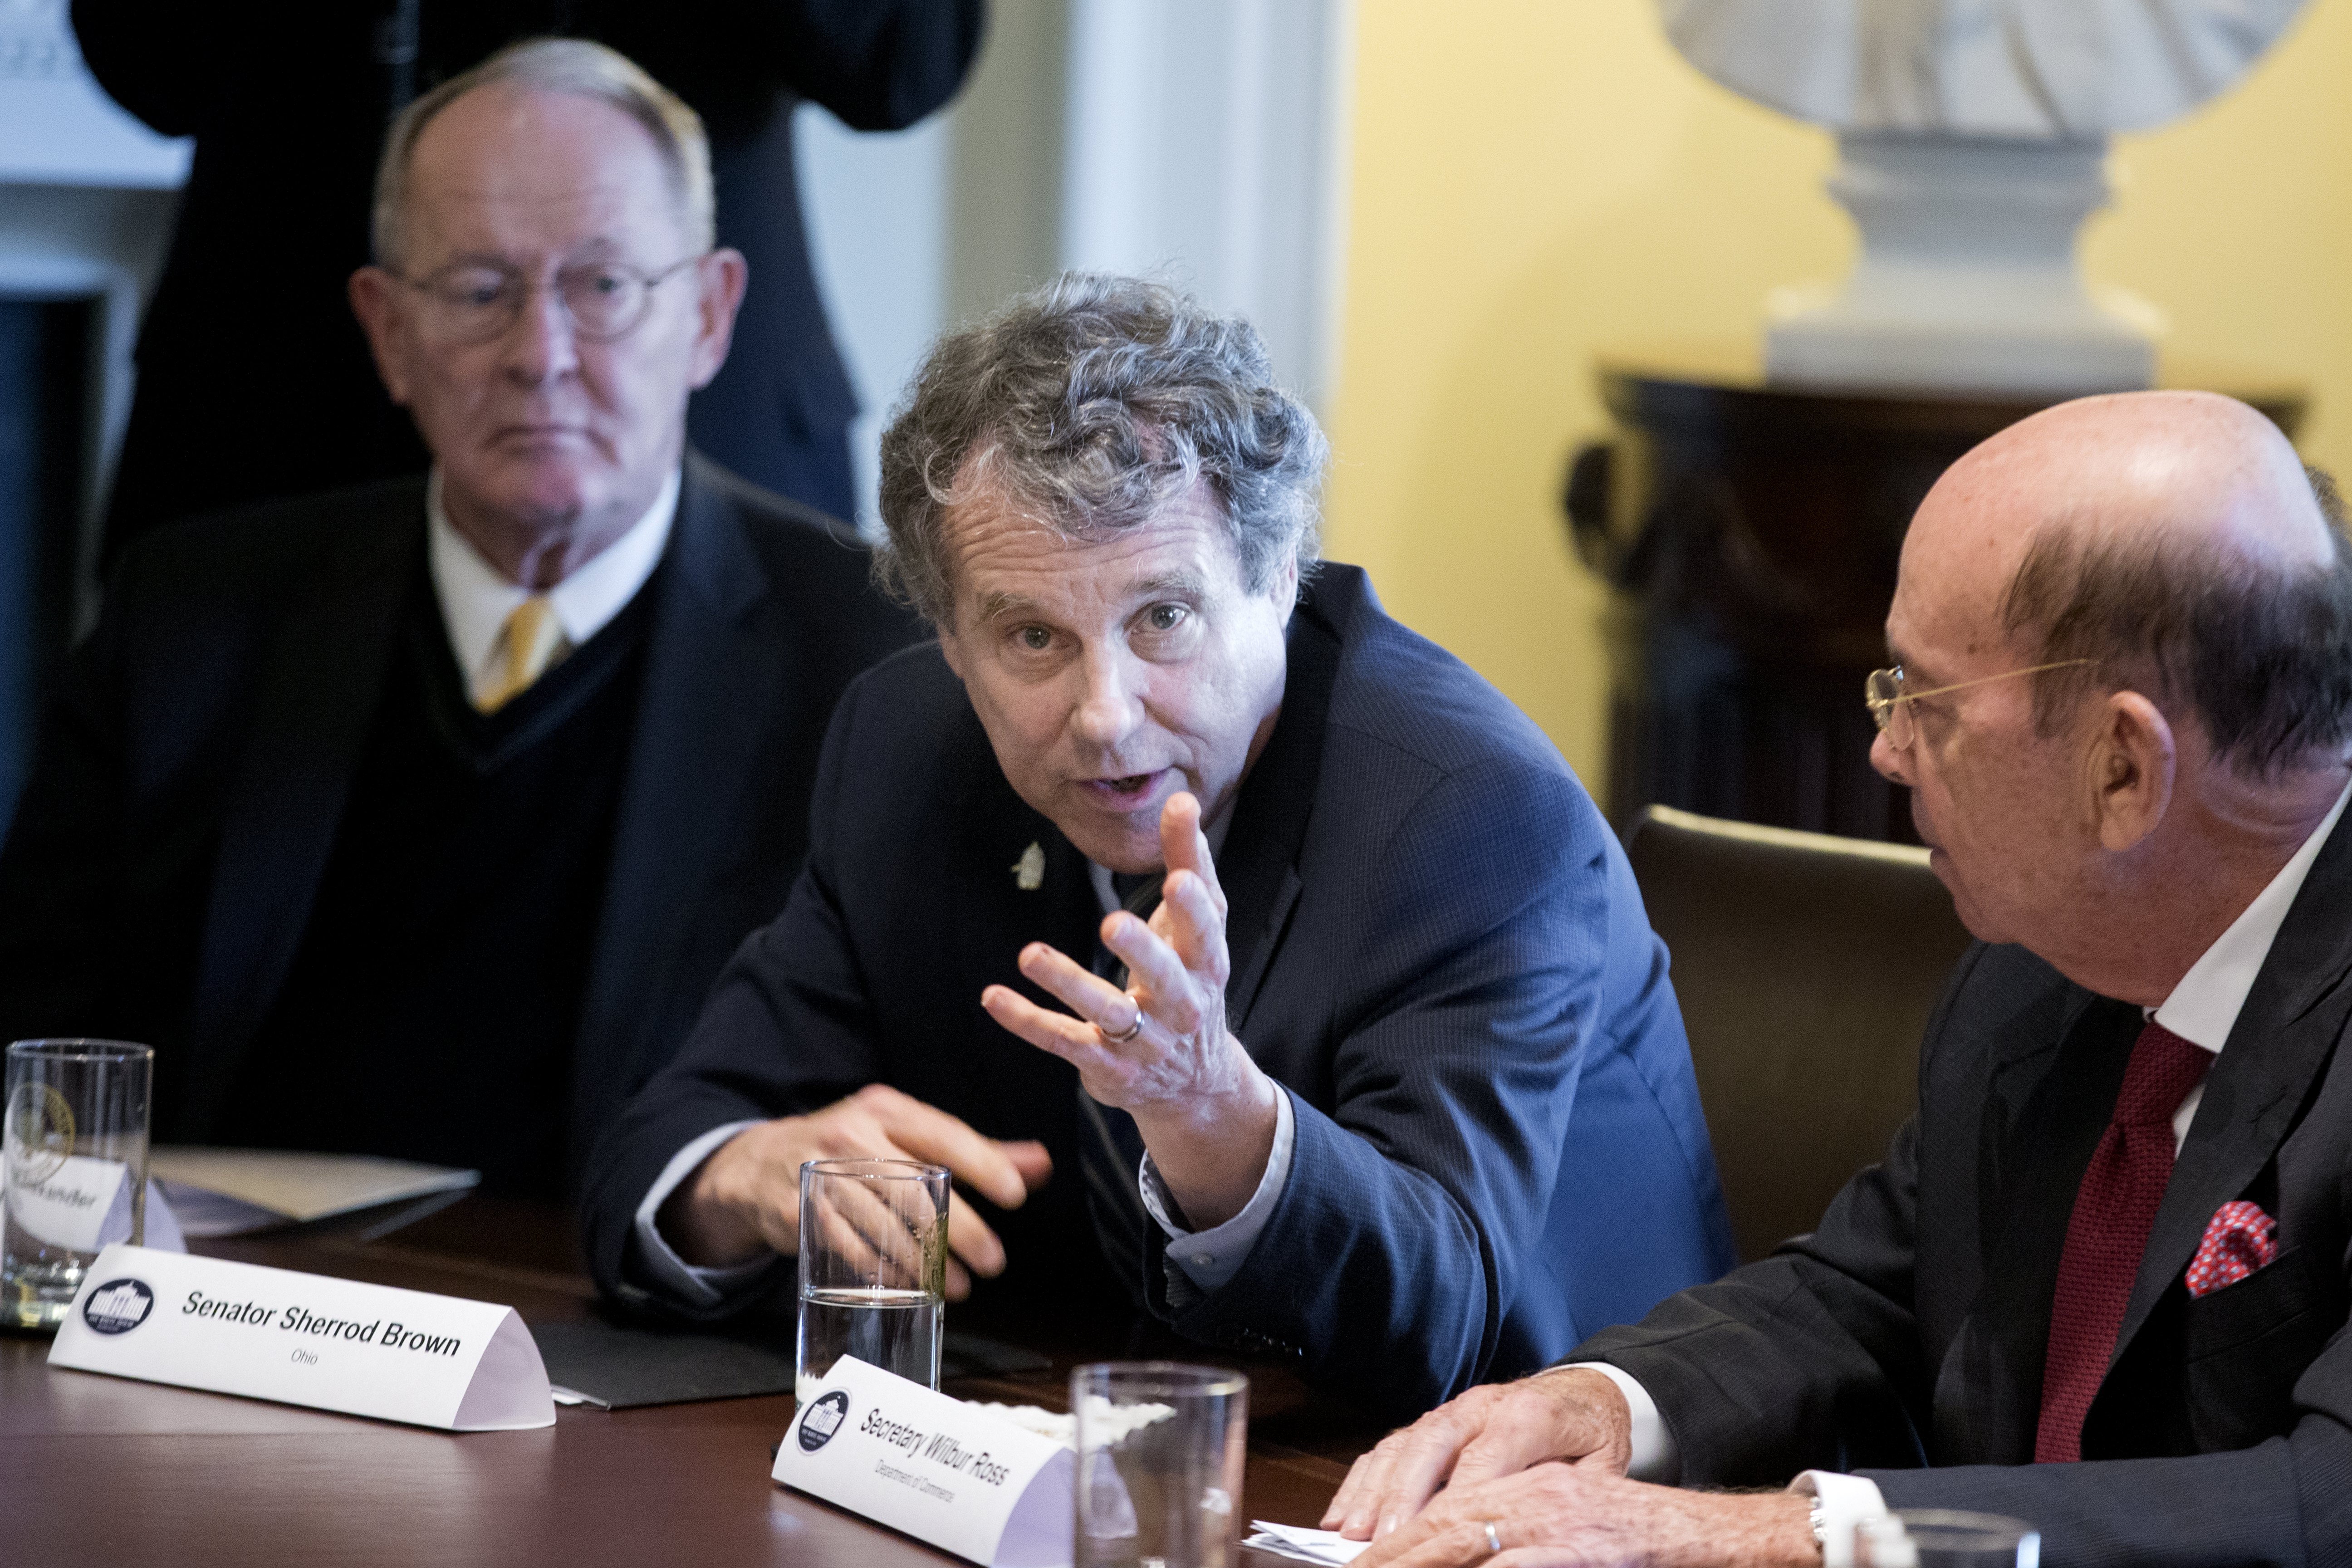 Democratic Senator from Ohio Sherrod Brown (C) speaks beside Republican Senator from Tennessee Lamar Alexander (L) and US Commerce Secretary Wilbur Ross (R) during a meeting on trade and the economy with members of Congress and US President Donald J. Trump (not pictured), in the Cabinet Room of the White House in Washington, DC, USA, Feb. 13, 2018. EFE